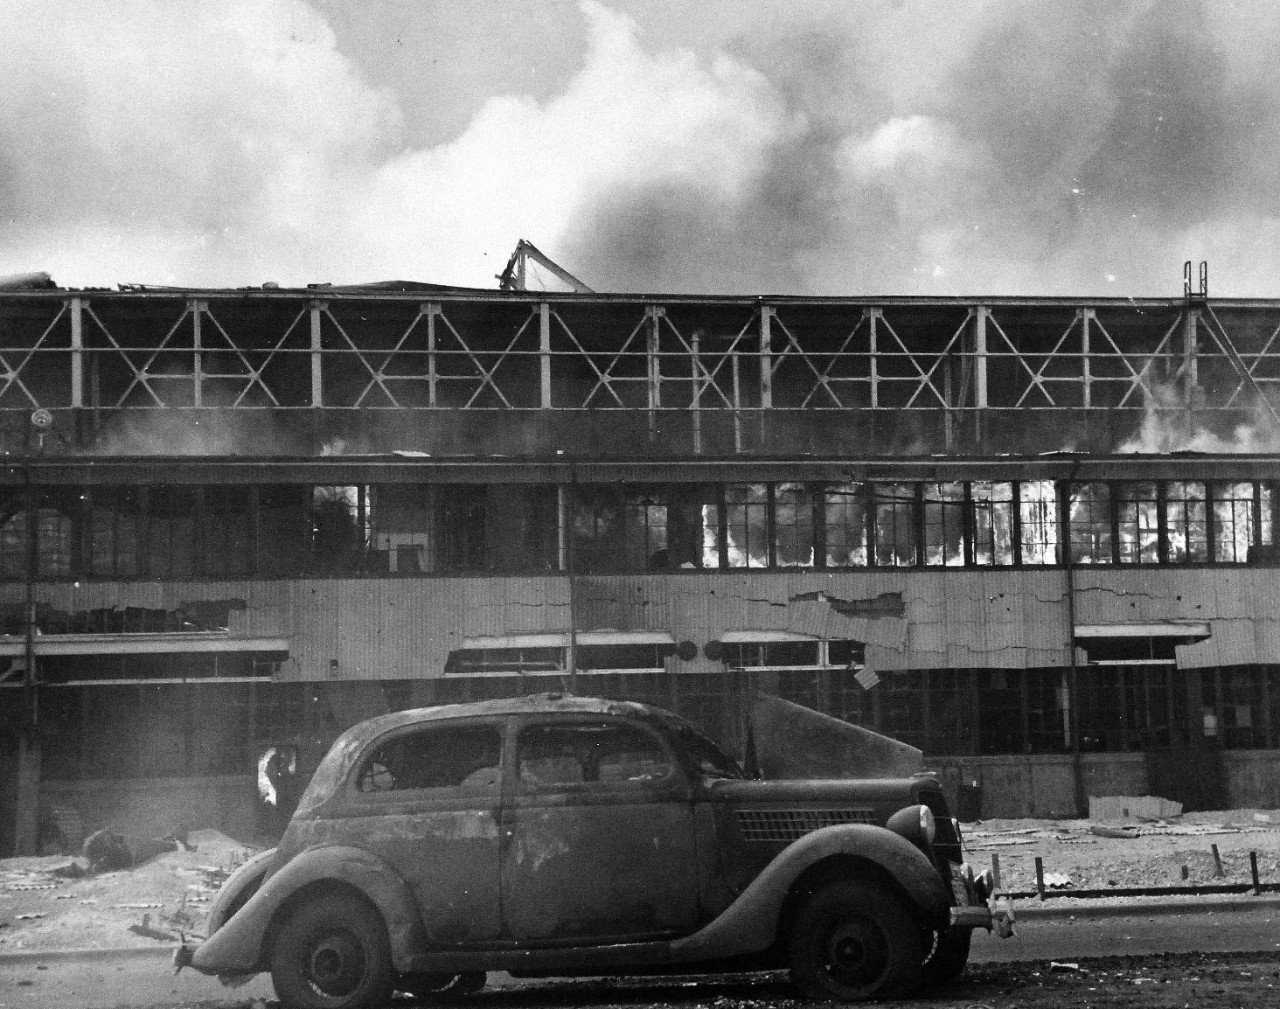 80-G-77652:   Japanese Attack on Pearl Harbor Attack, 7 December 1941.  Smoldering U.S. Navy Hangar at Naval Air Station, Kaneohe Bay, Oahu, after  Japanese attack.  Note, the wrecked automobile. U.S. Navy photograph, now in the collections of the National Archives (3/4/2015).